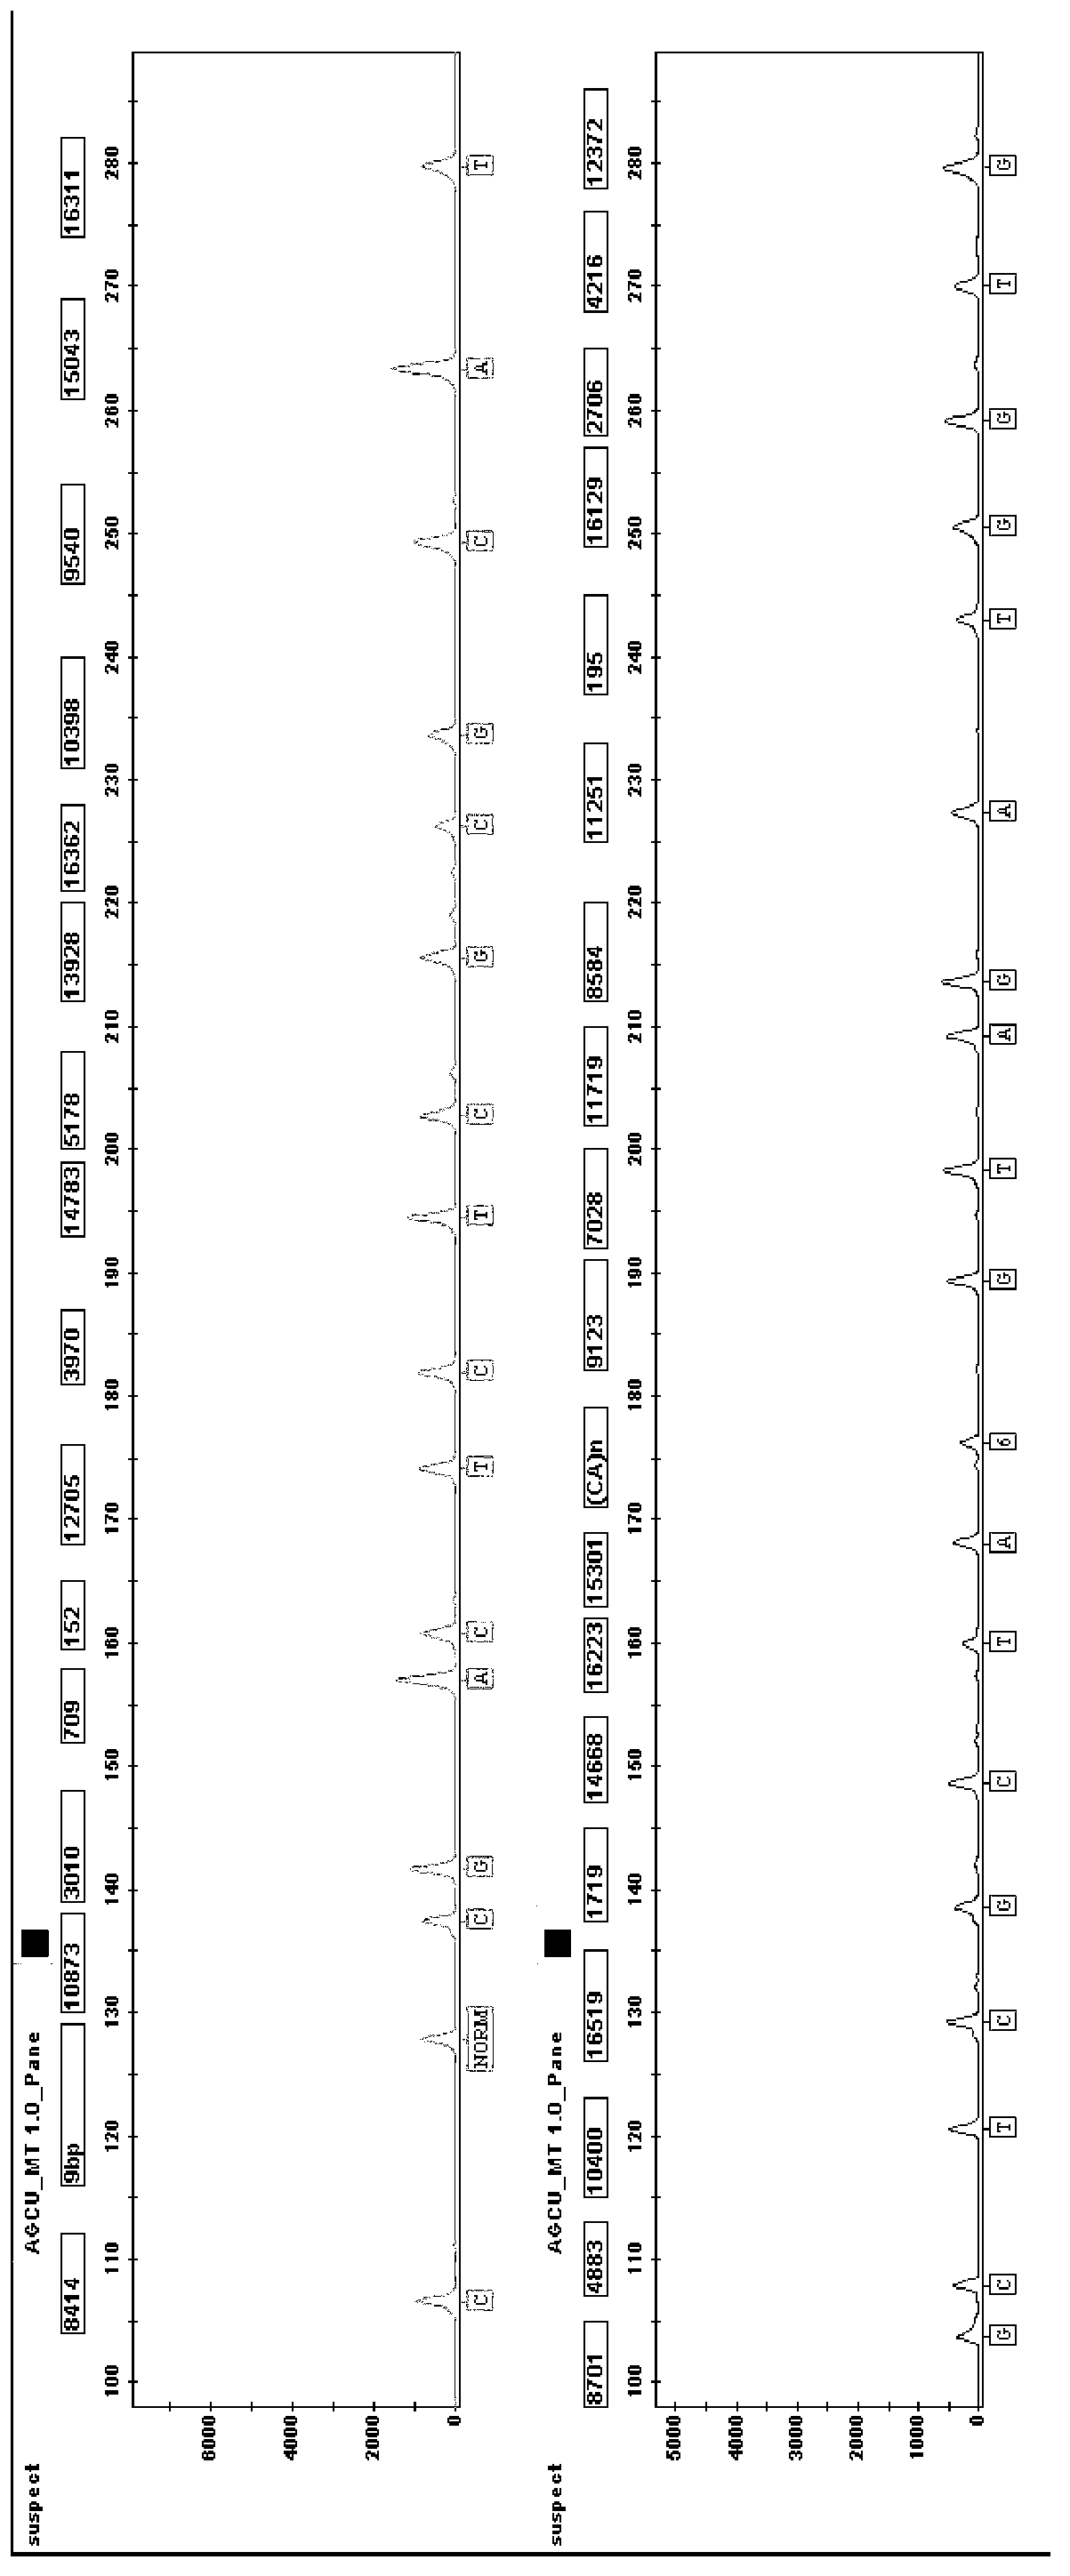 Mitochondrial SNP fluorescence labeling composite amplification kit and application thereof